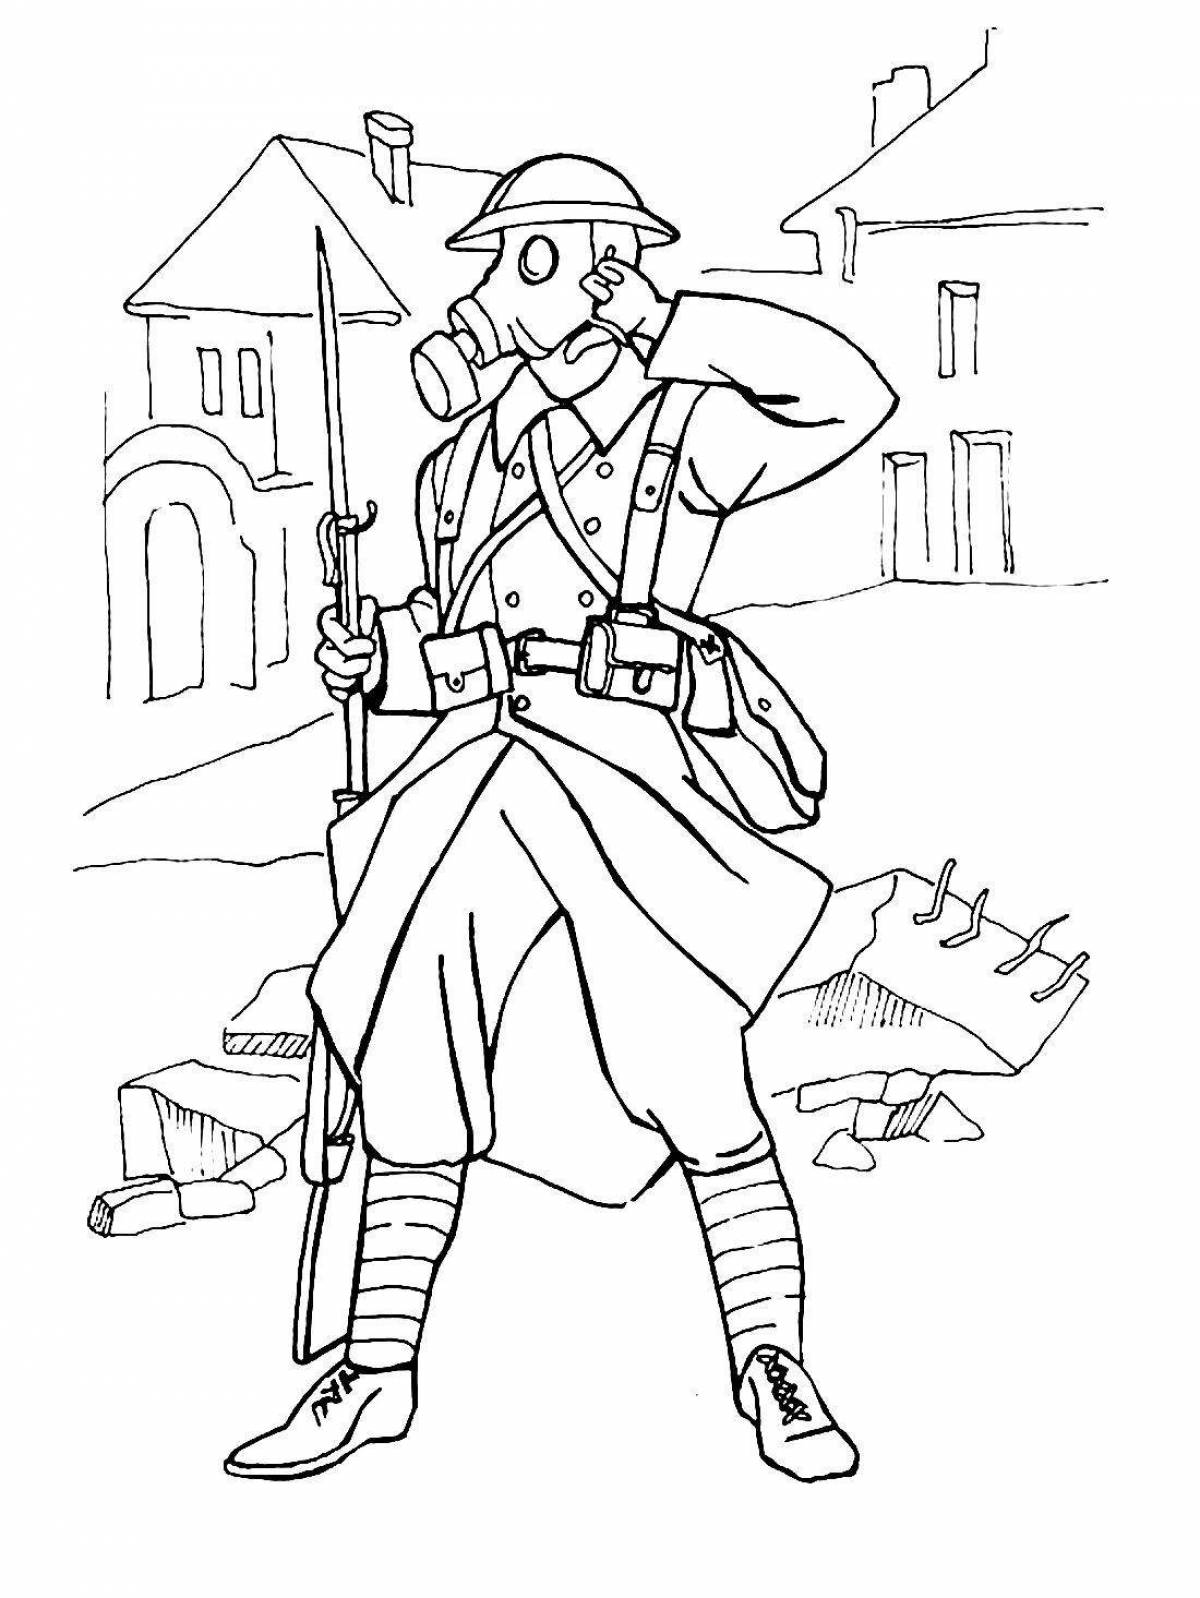 Saboteur coloring page animated